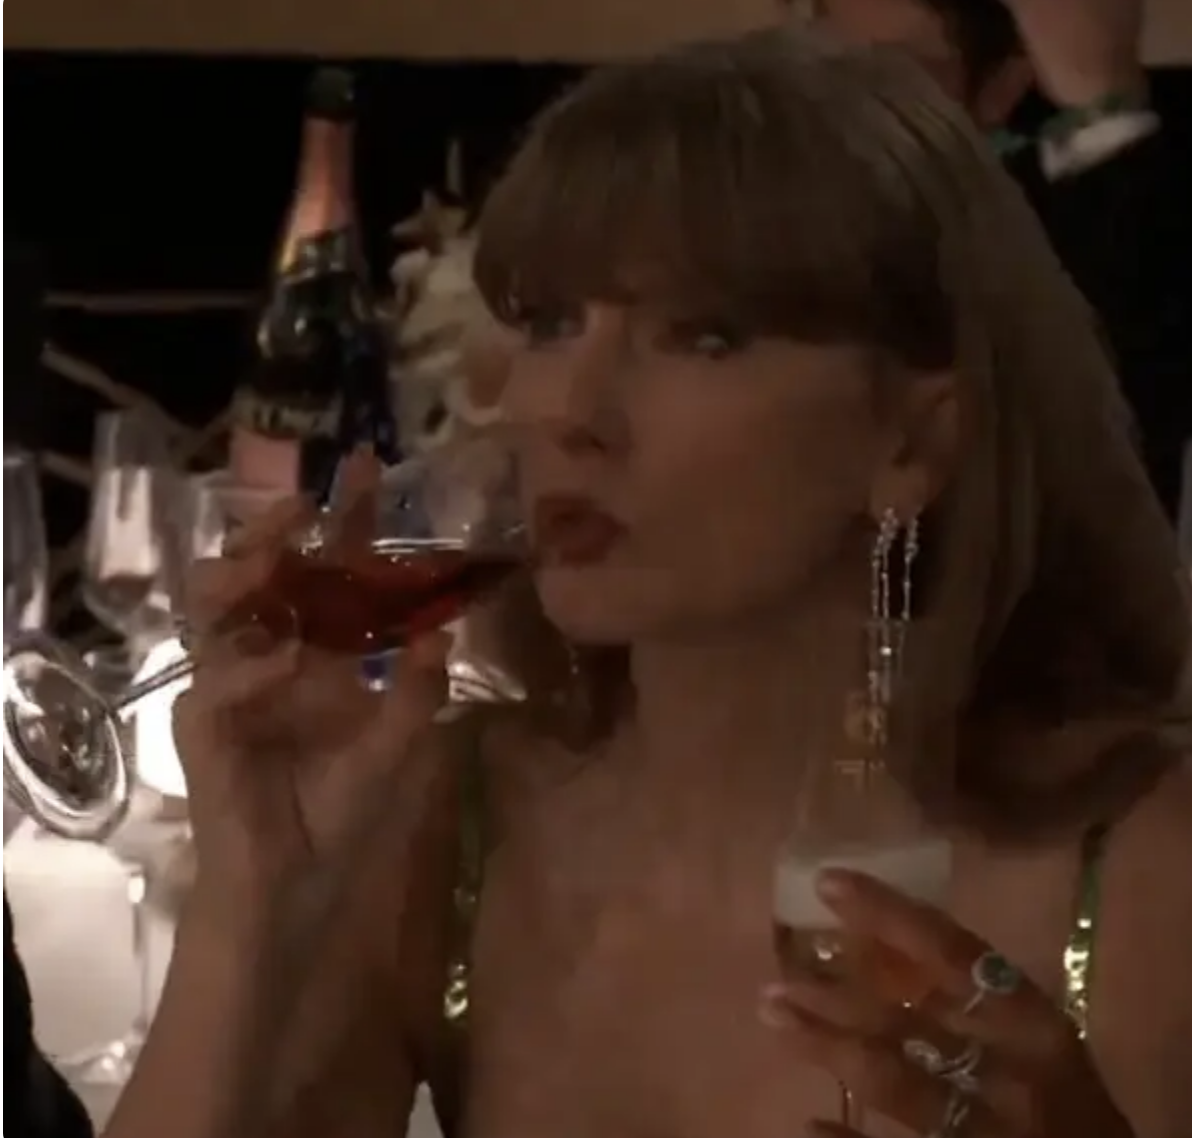 Taylor Swift sipping a drink at an event, wearing sparkling earrings and a sequined dress